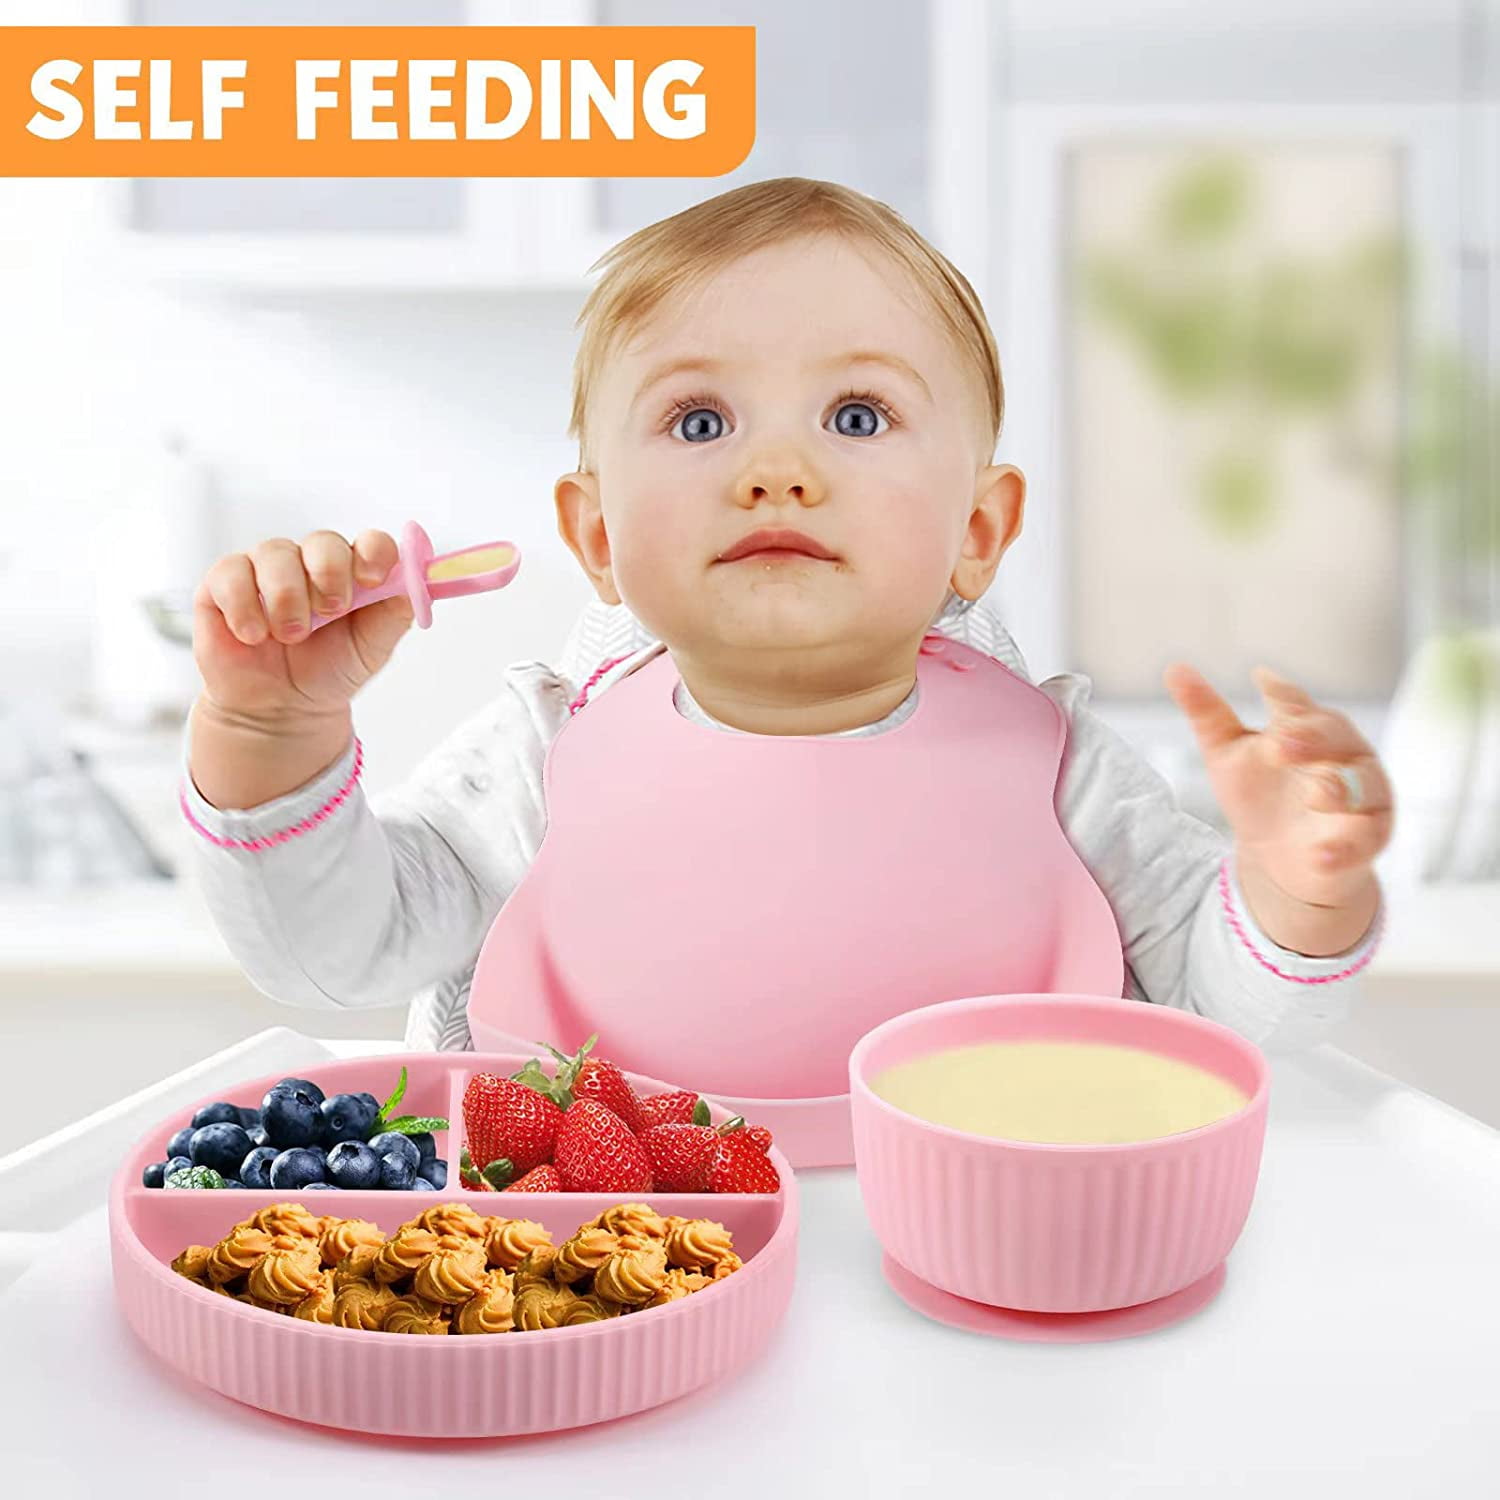 HippoBaby Silicone Baby Feeding Set | 10 Piece Baby LED Weaning Supplies | Toddler Plates Bowls Set with Suction | Self Feeding Spoons | Plates for